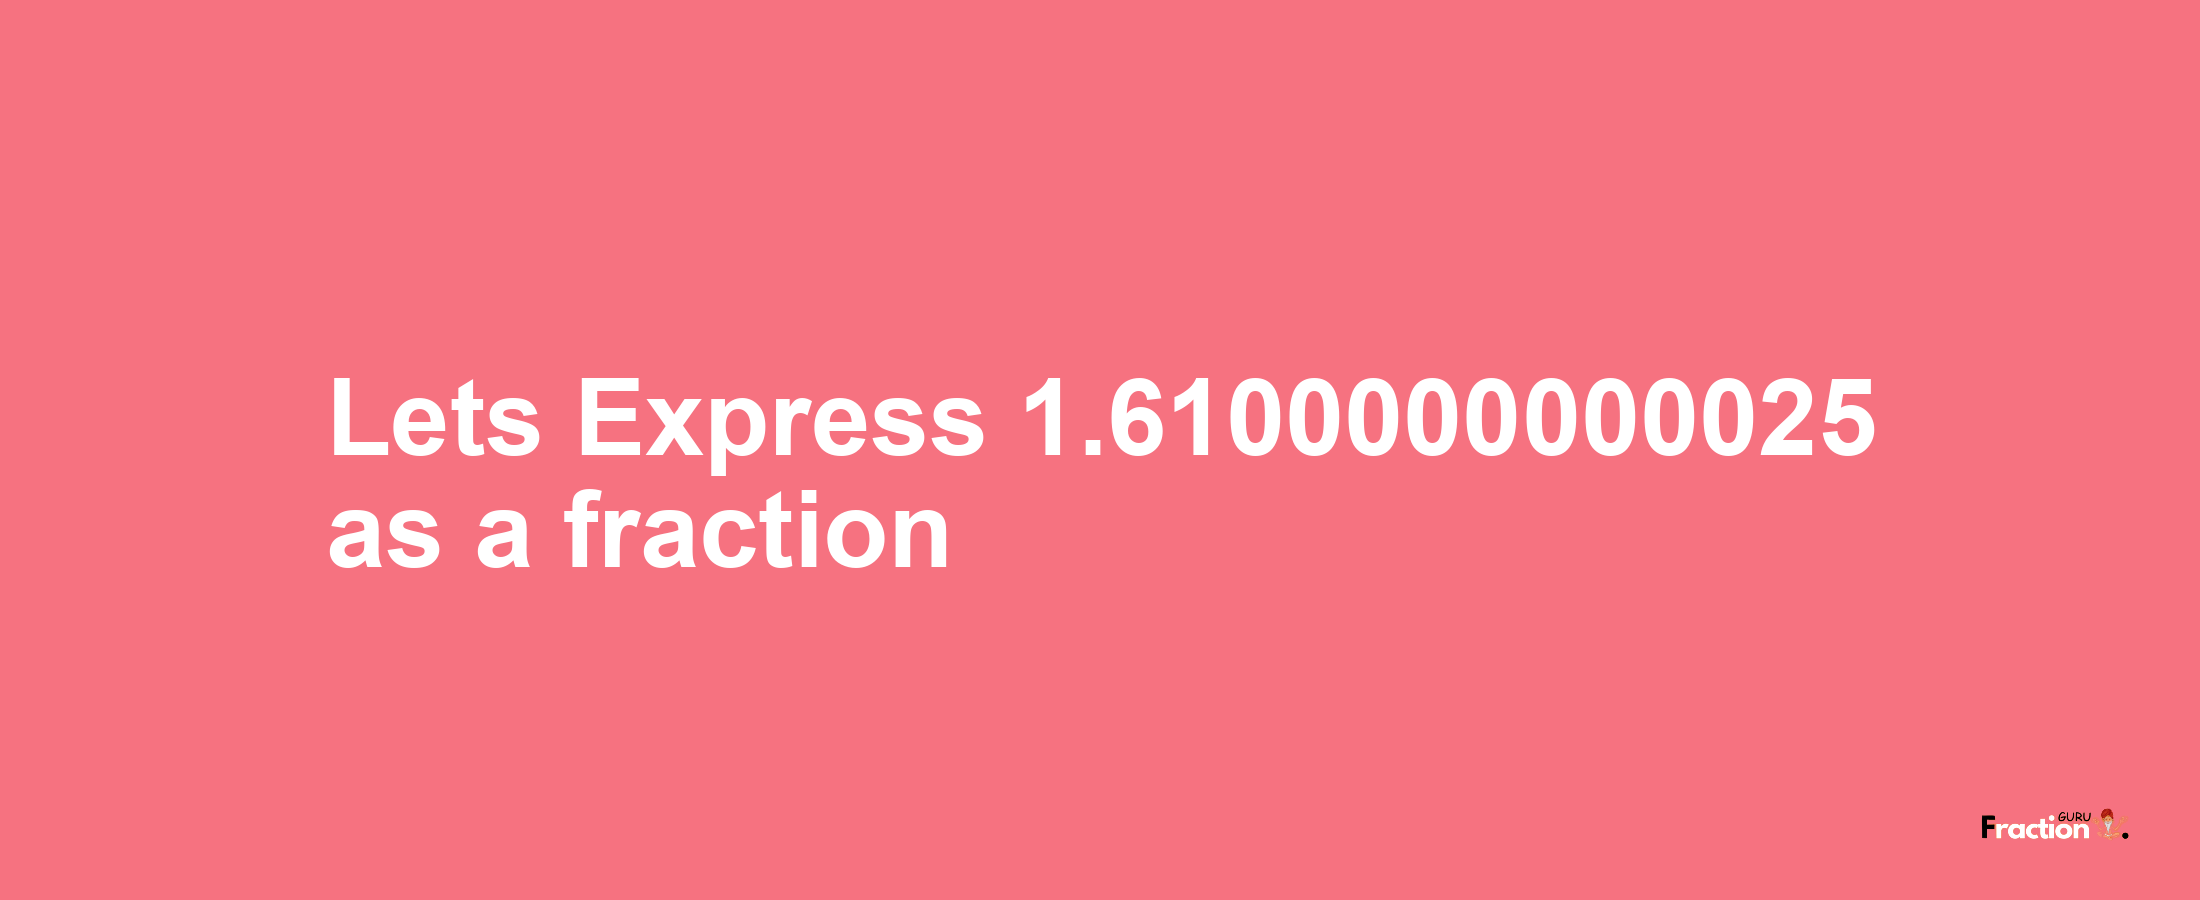 Lets Express 1.6100000000025 as afraction